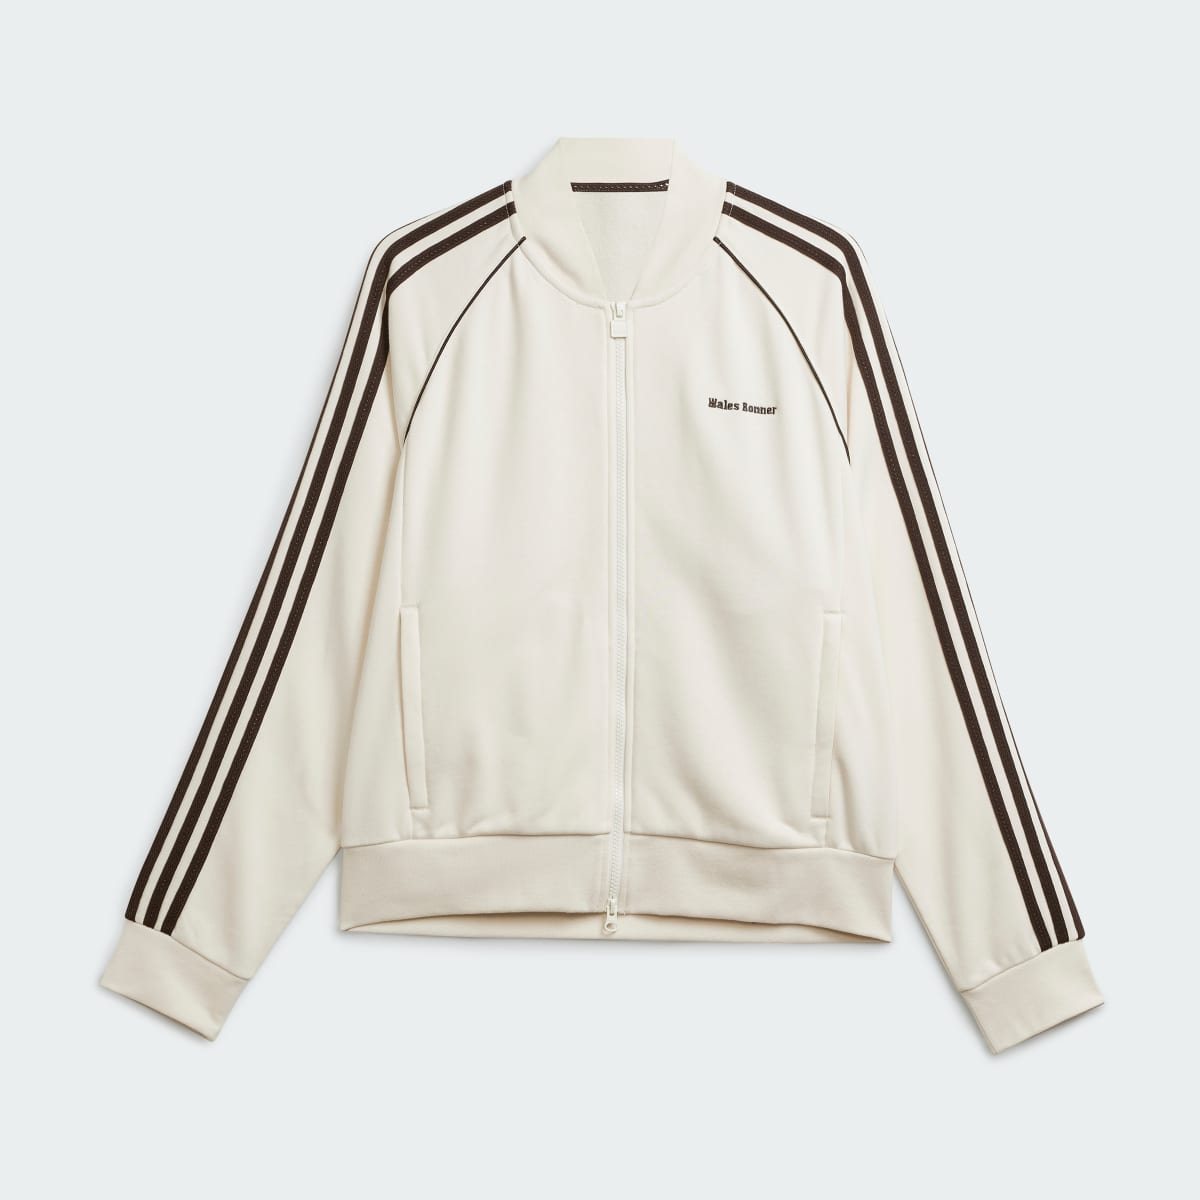 Adidas Wales Bonner Statement Track Top. 4